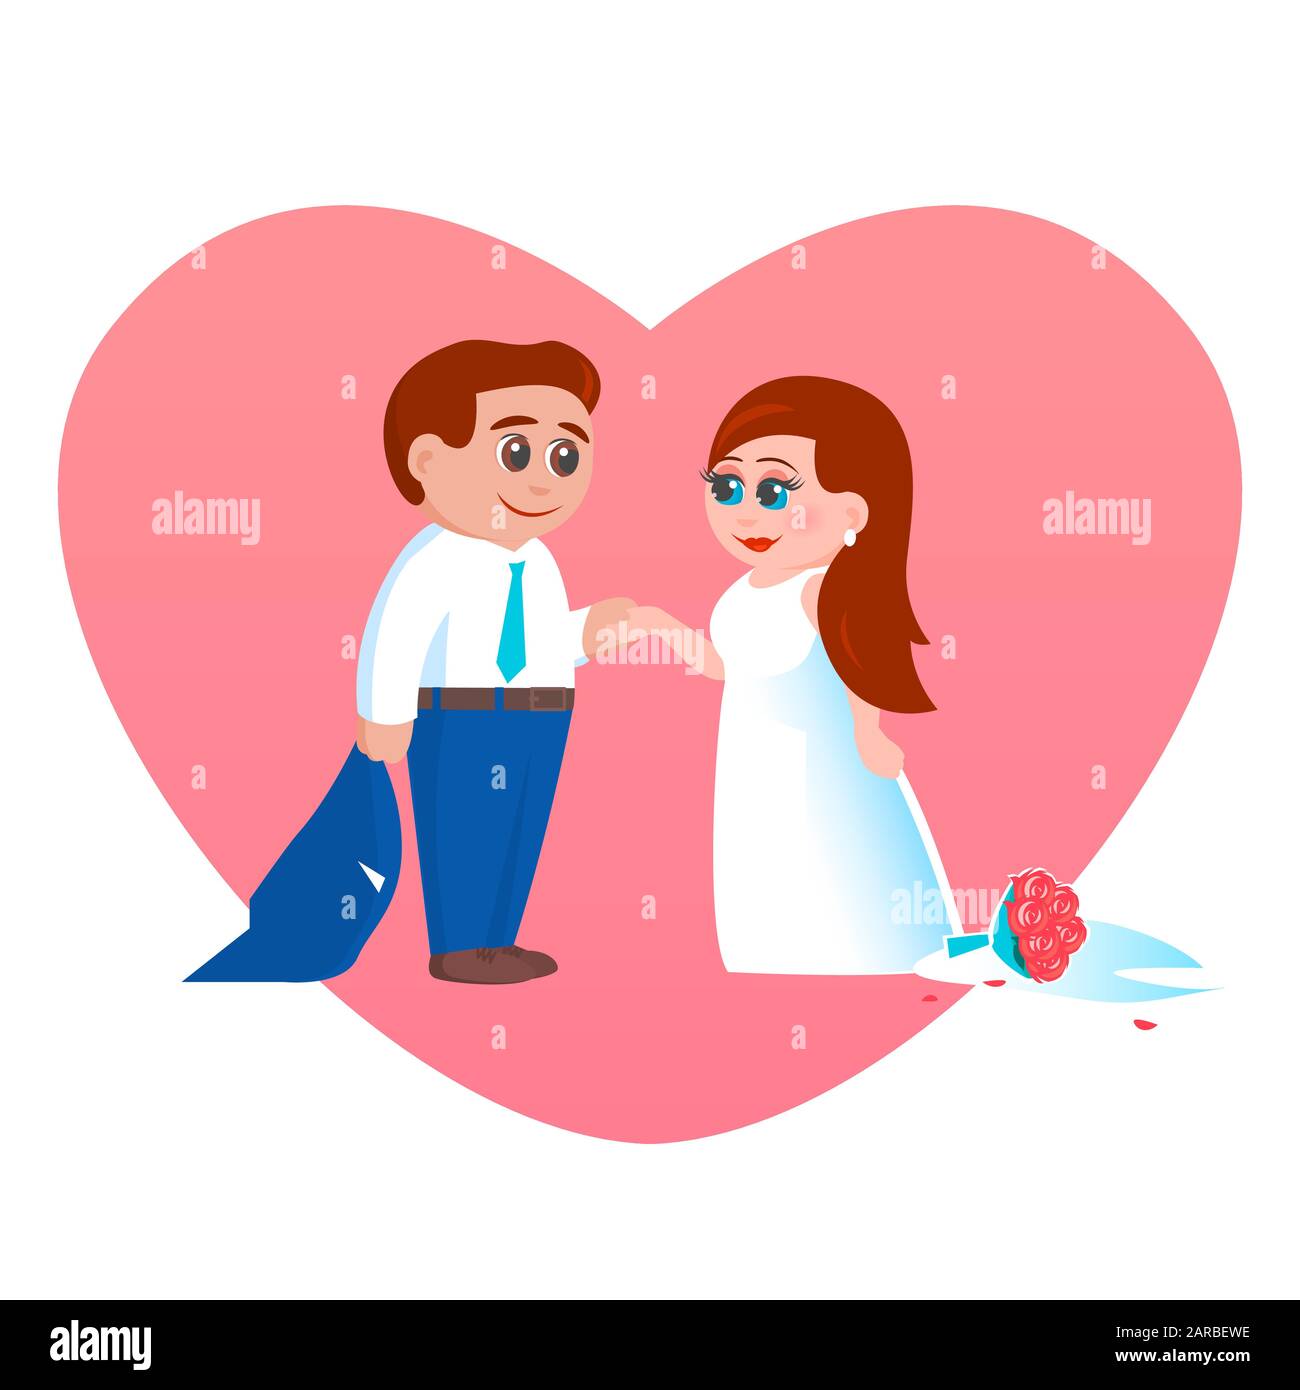 Engagement Love Hands - Couples Gifts – OhHappyPrintables